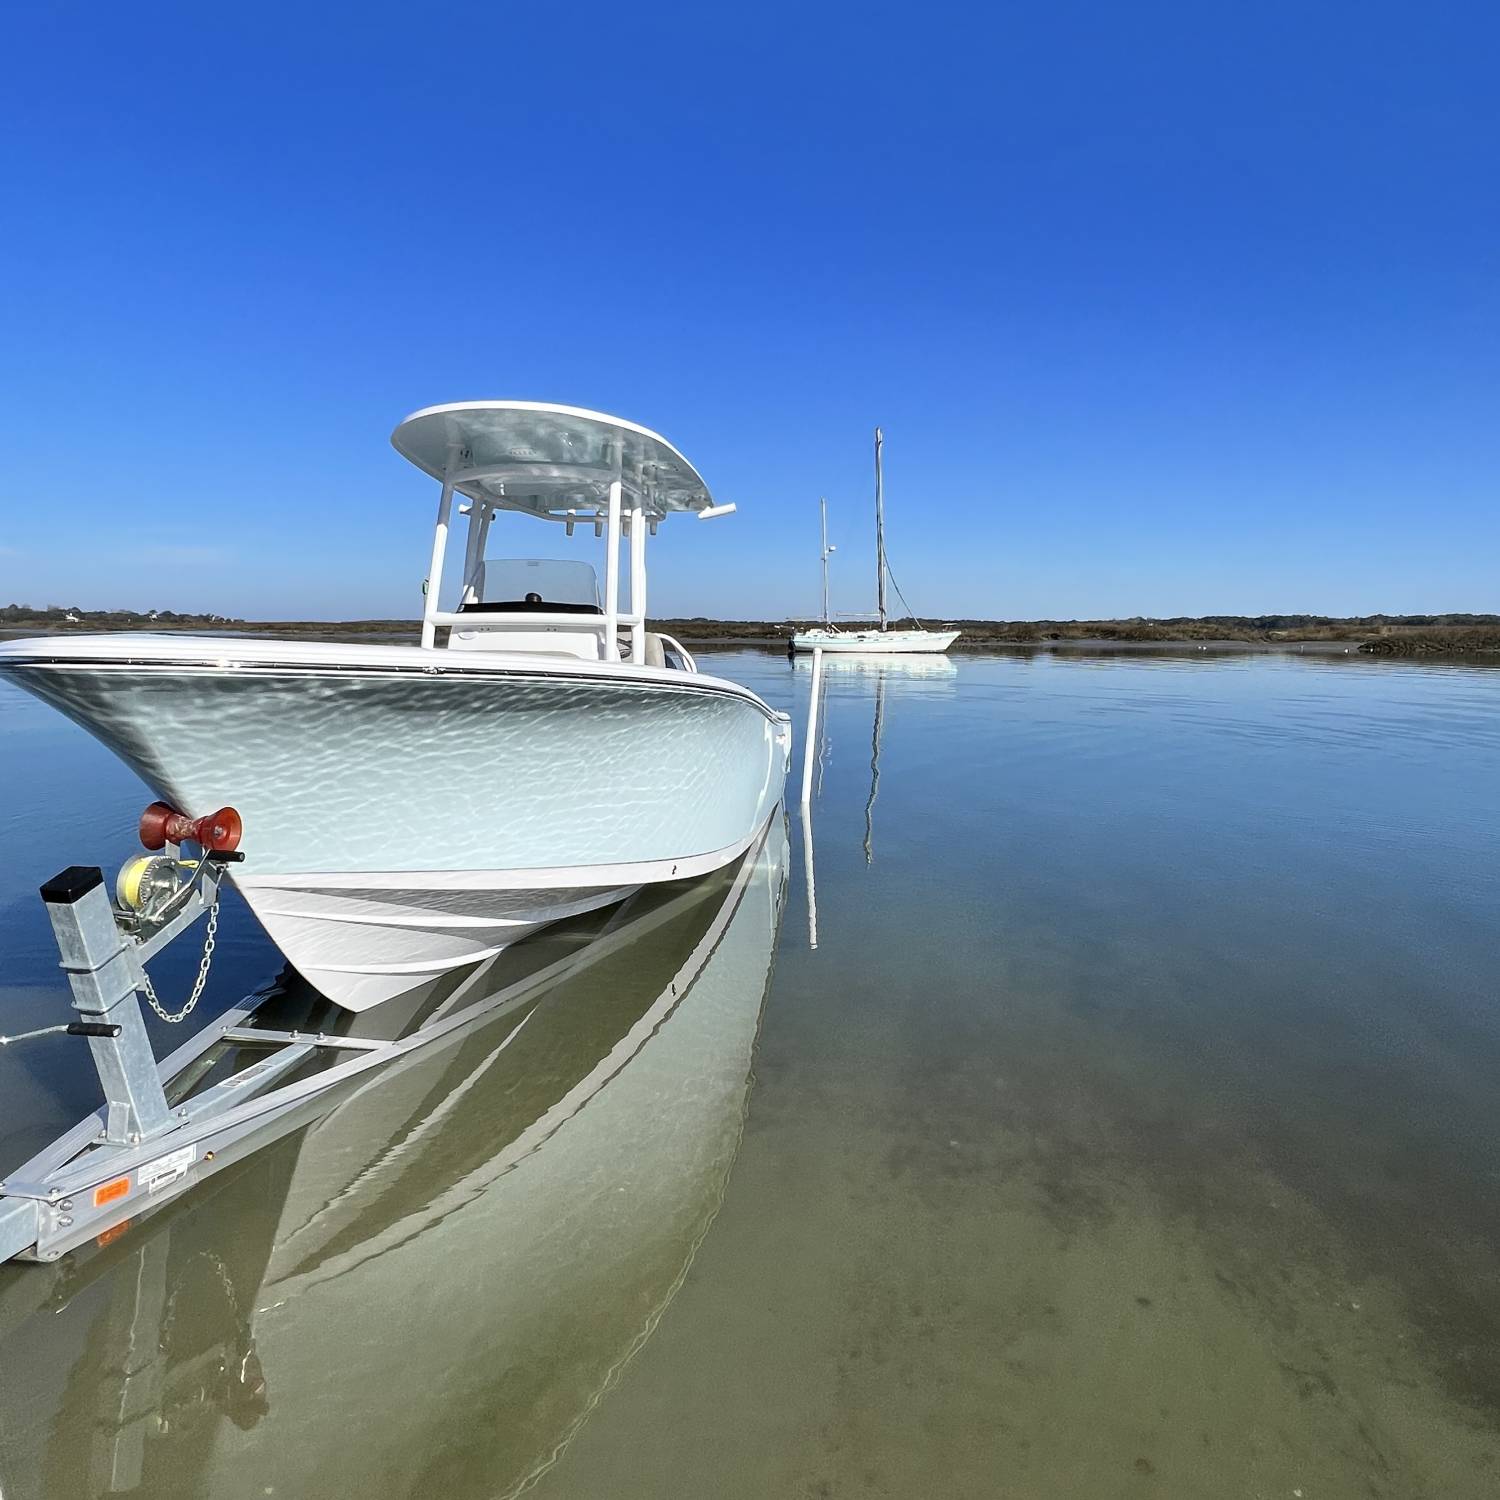 This image is of my Heritage 231 Platinum at my favorite boat landing. It was a perfectly calm day and...